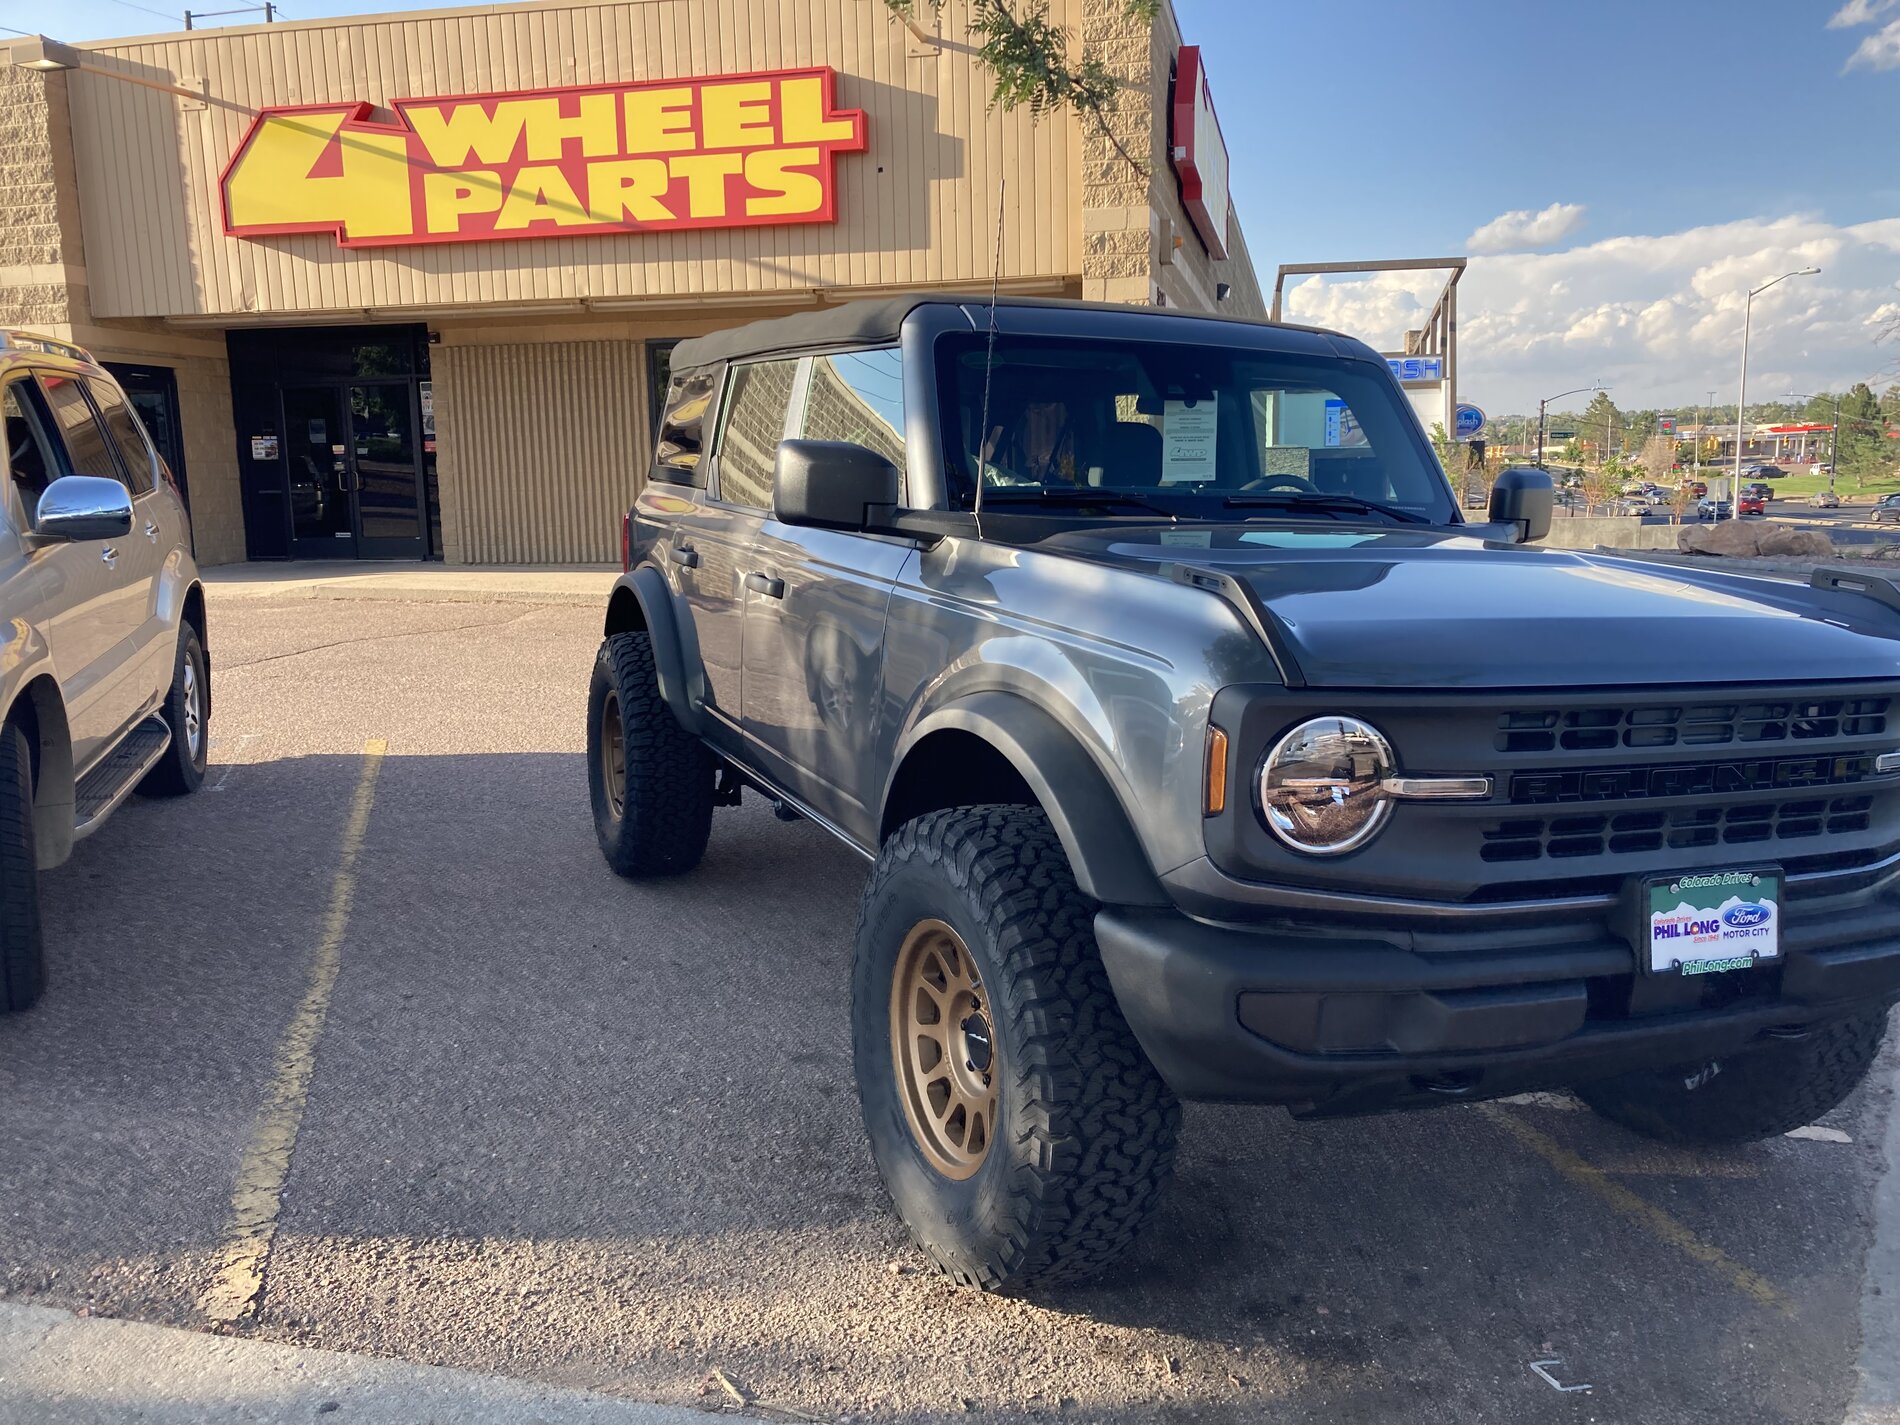 Ford Bronco Base Bronco Shawty Build Featuring 35’s by Hypebeast Dad 18A7A56B-CE49-493B-A4A5-A943D327CEBE